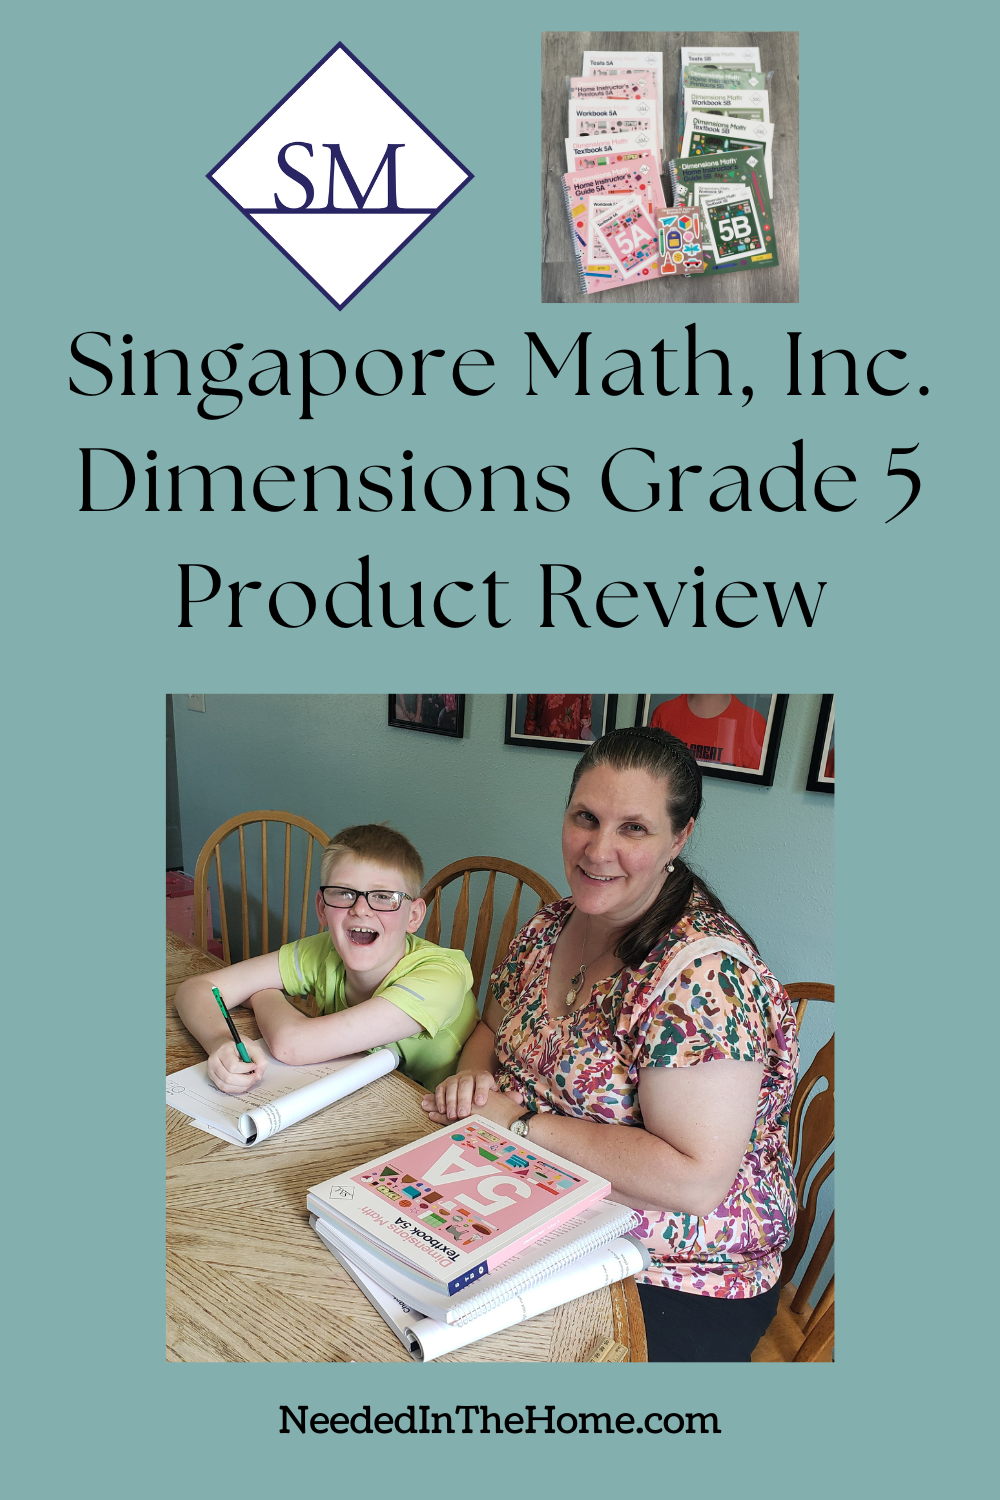 pinterest pin description singapore math inc logo dimensions grade 5 product review books mother and son smiling while doing math homeschool neededinthehome 